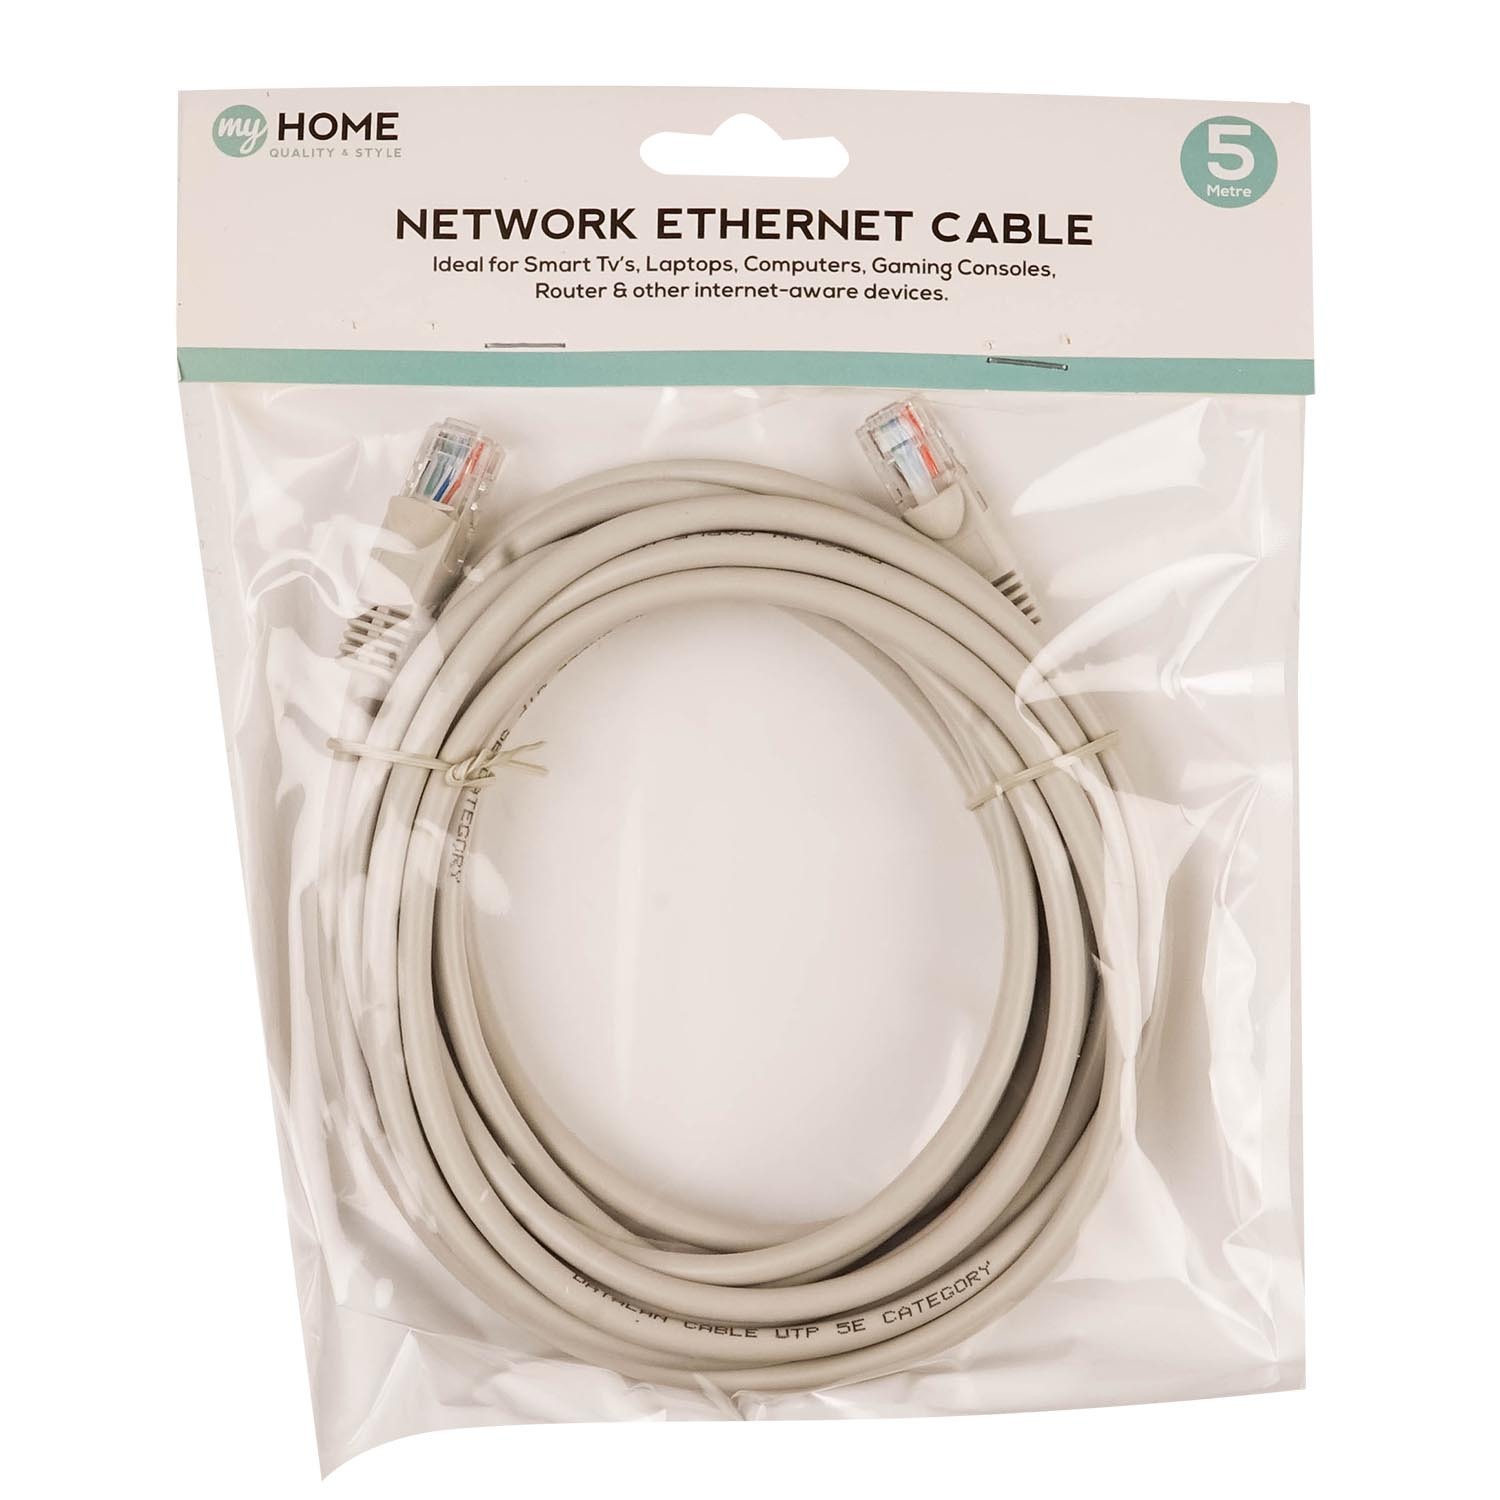 Network Ethernet Cables - White / 500cm Image 2